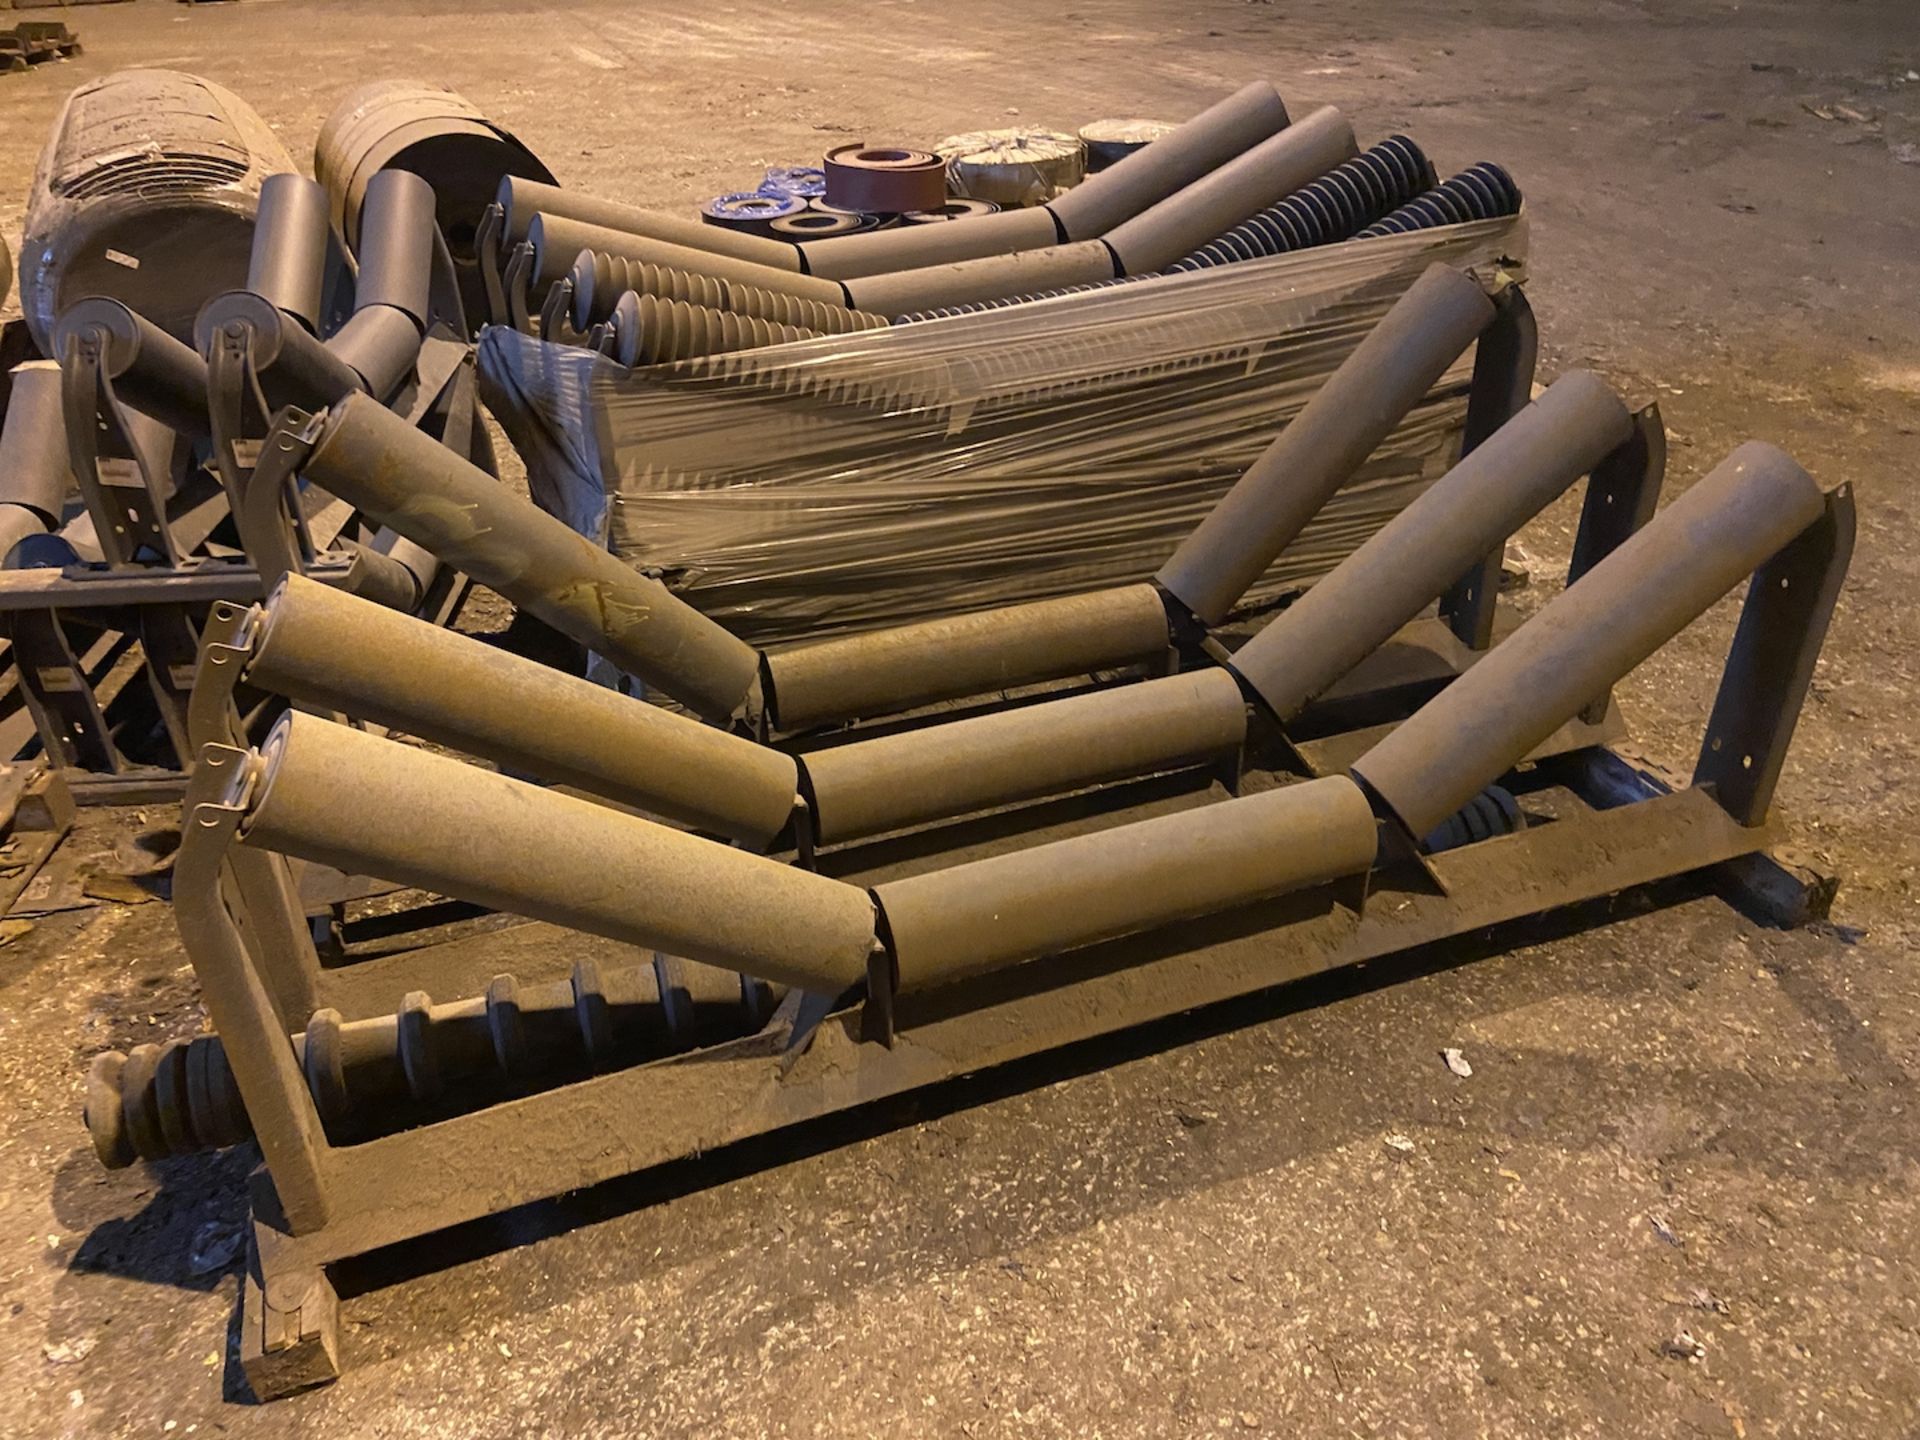 Conveyor Spare Parts (All Pictured, No Belts), Rigging/ Removal Fee: $1,000 - Image 2 of 13